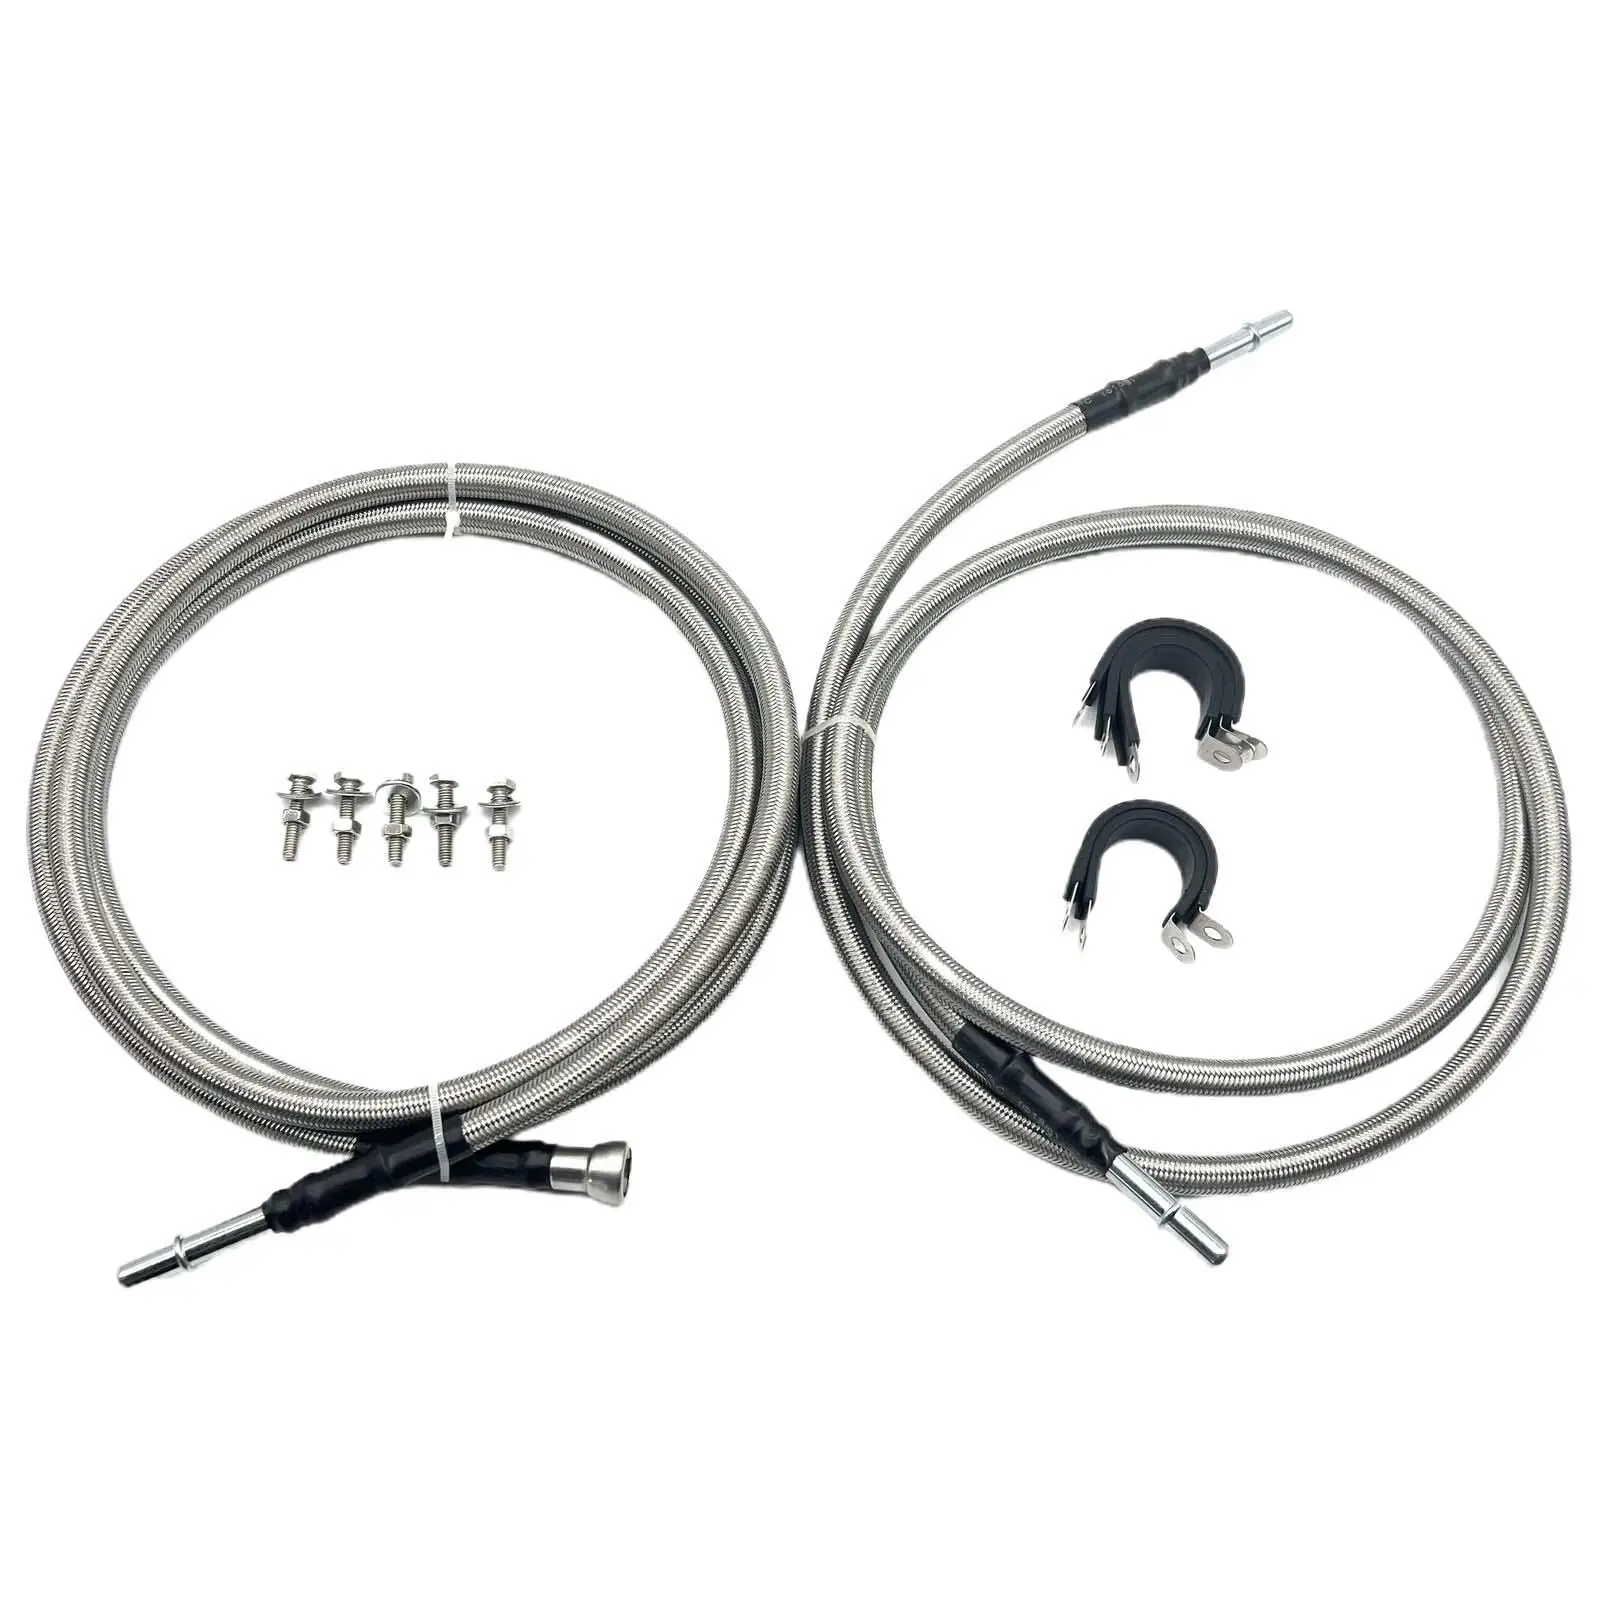 Fuel Line Quick Fix Set Direct Replaces Durable Repair Parts Easy to Install Accessory